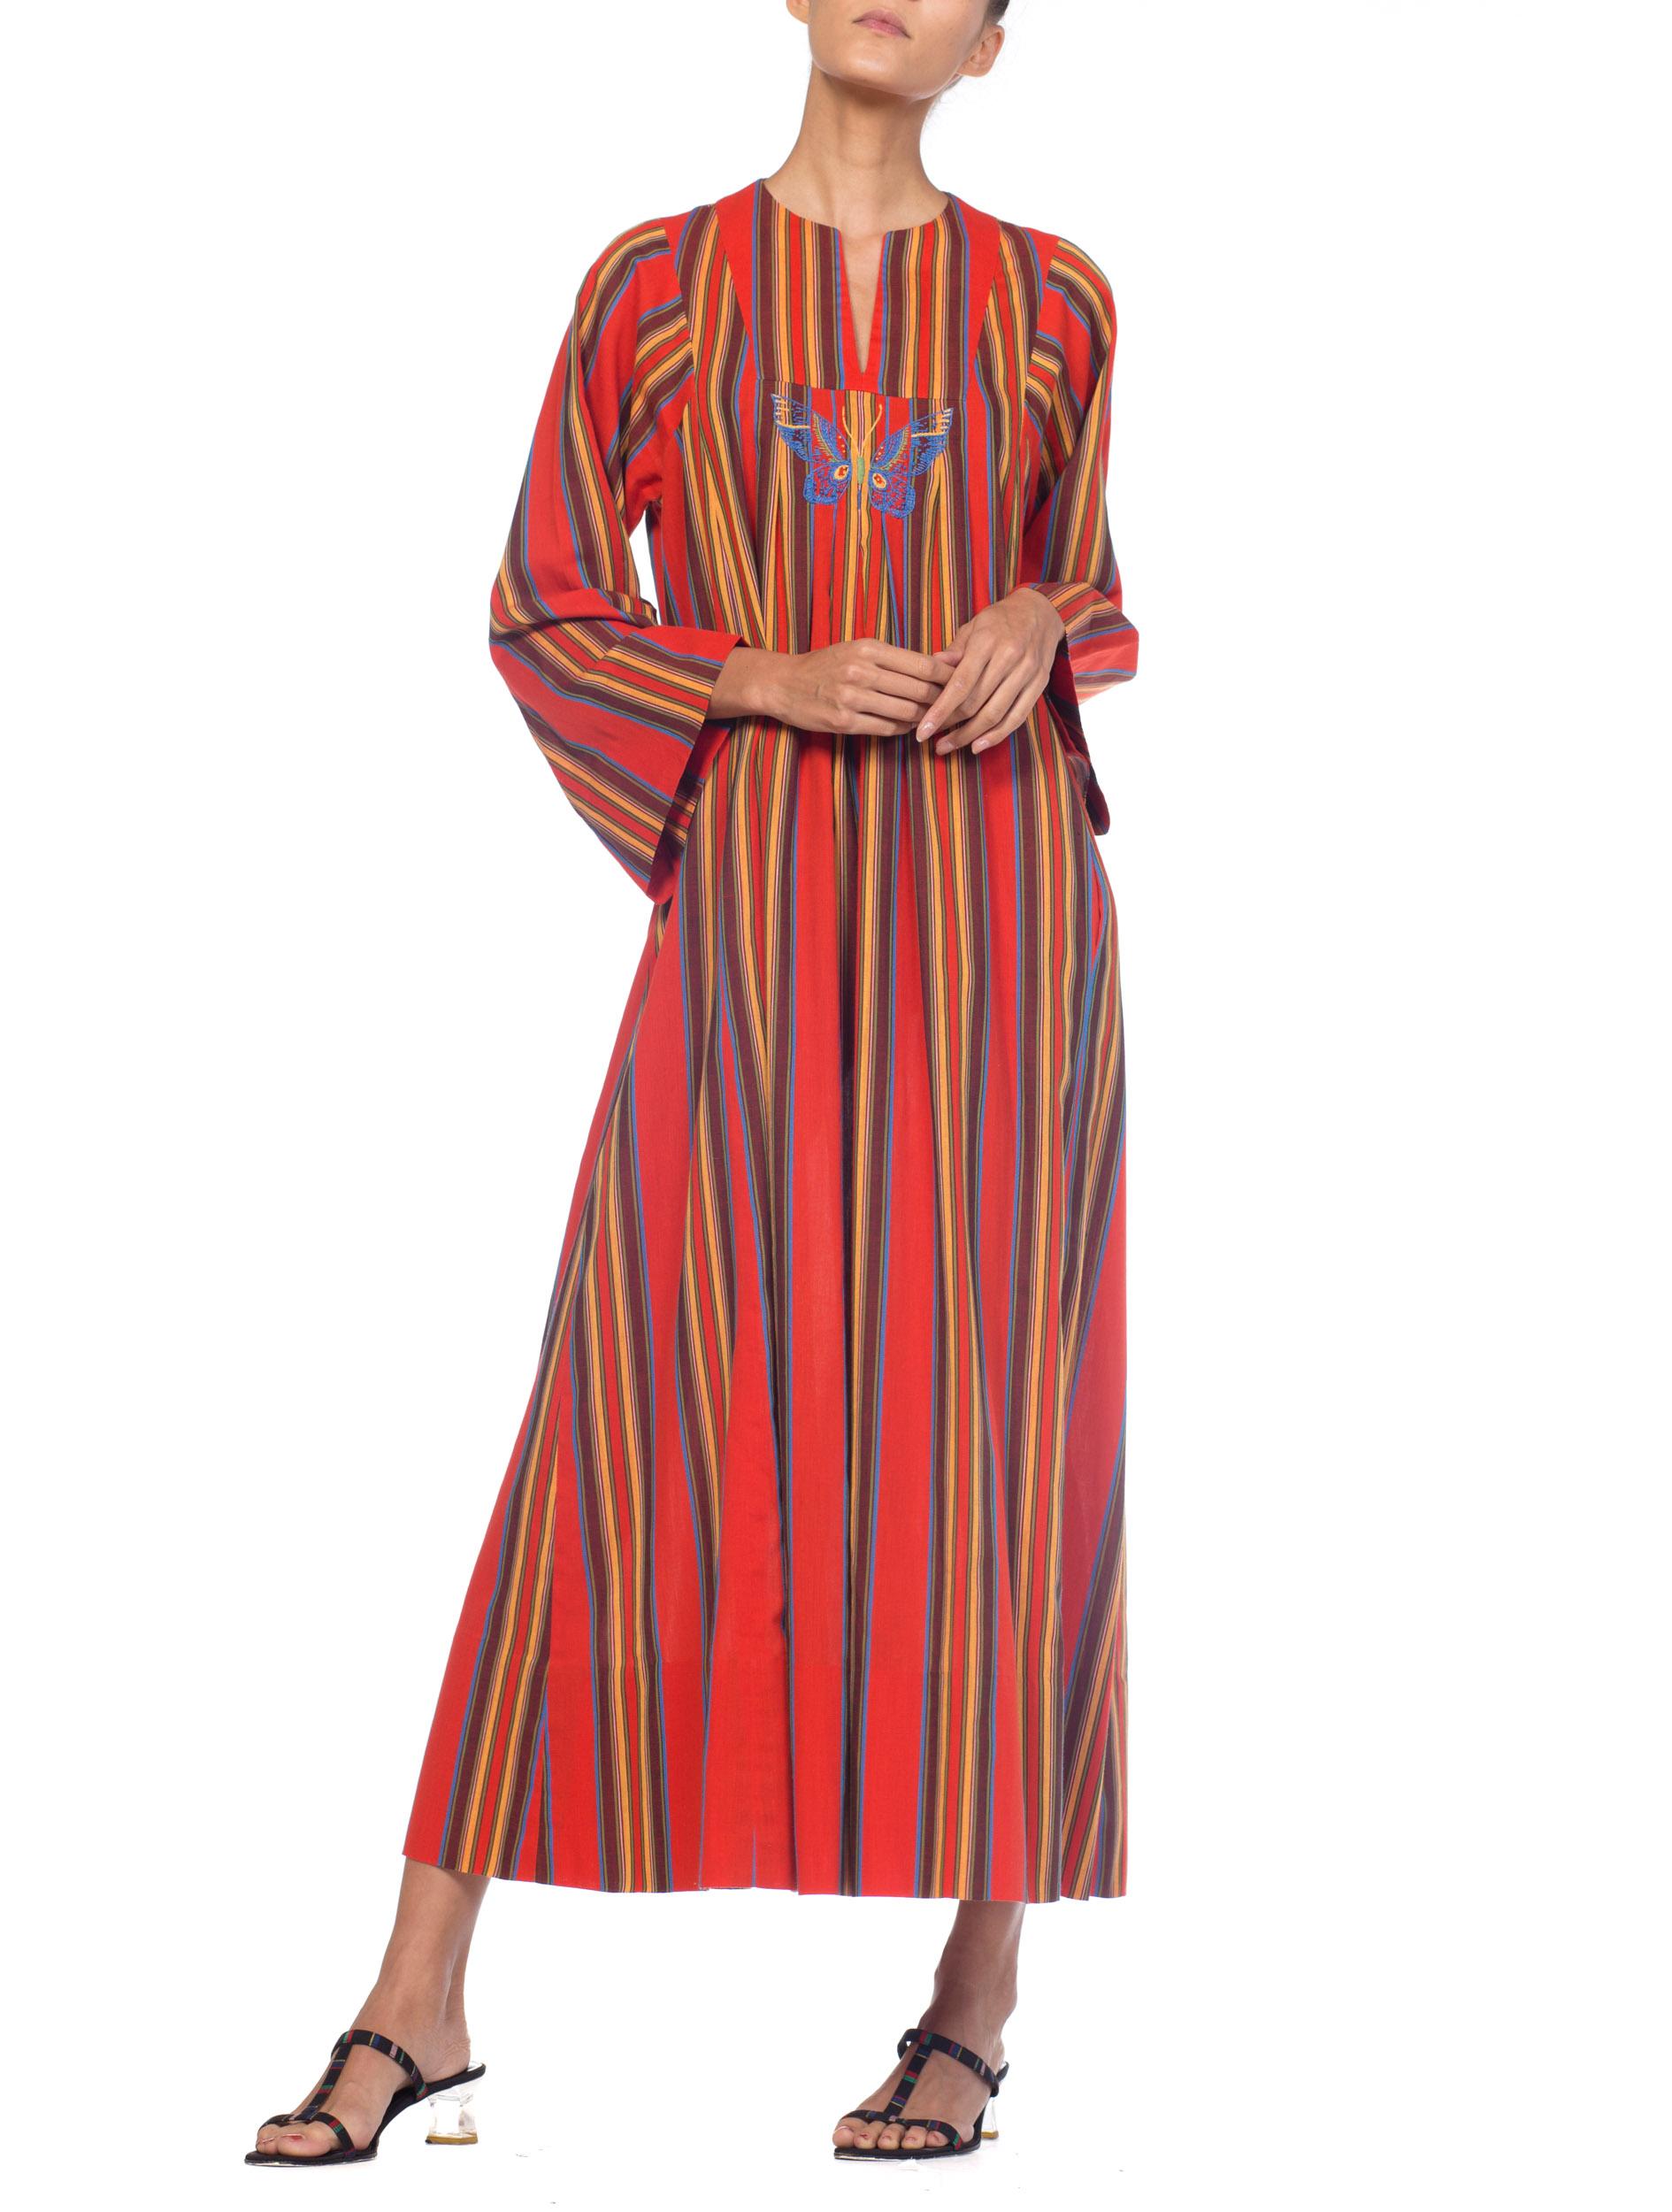 Women's 1970s Kaftan Dress With Embroidered Butterfly